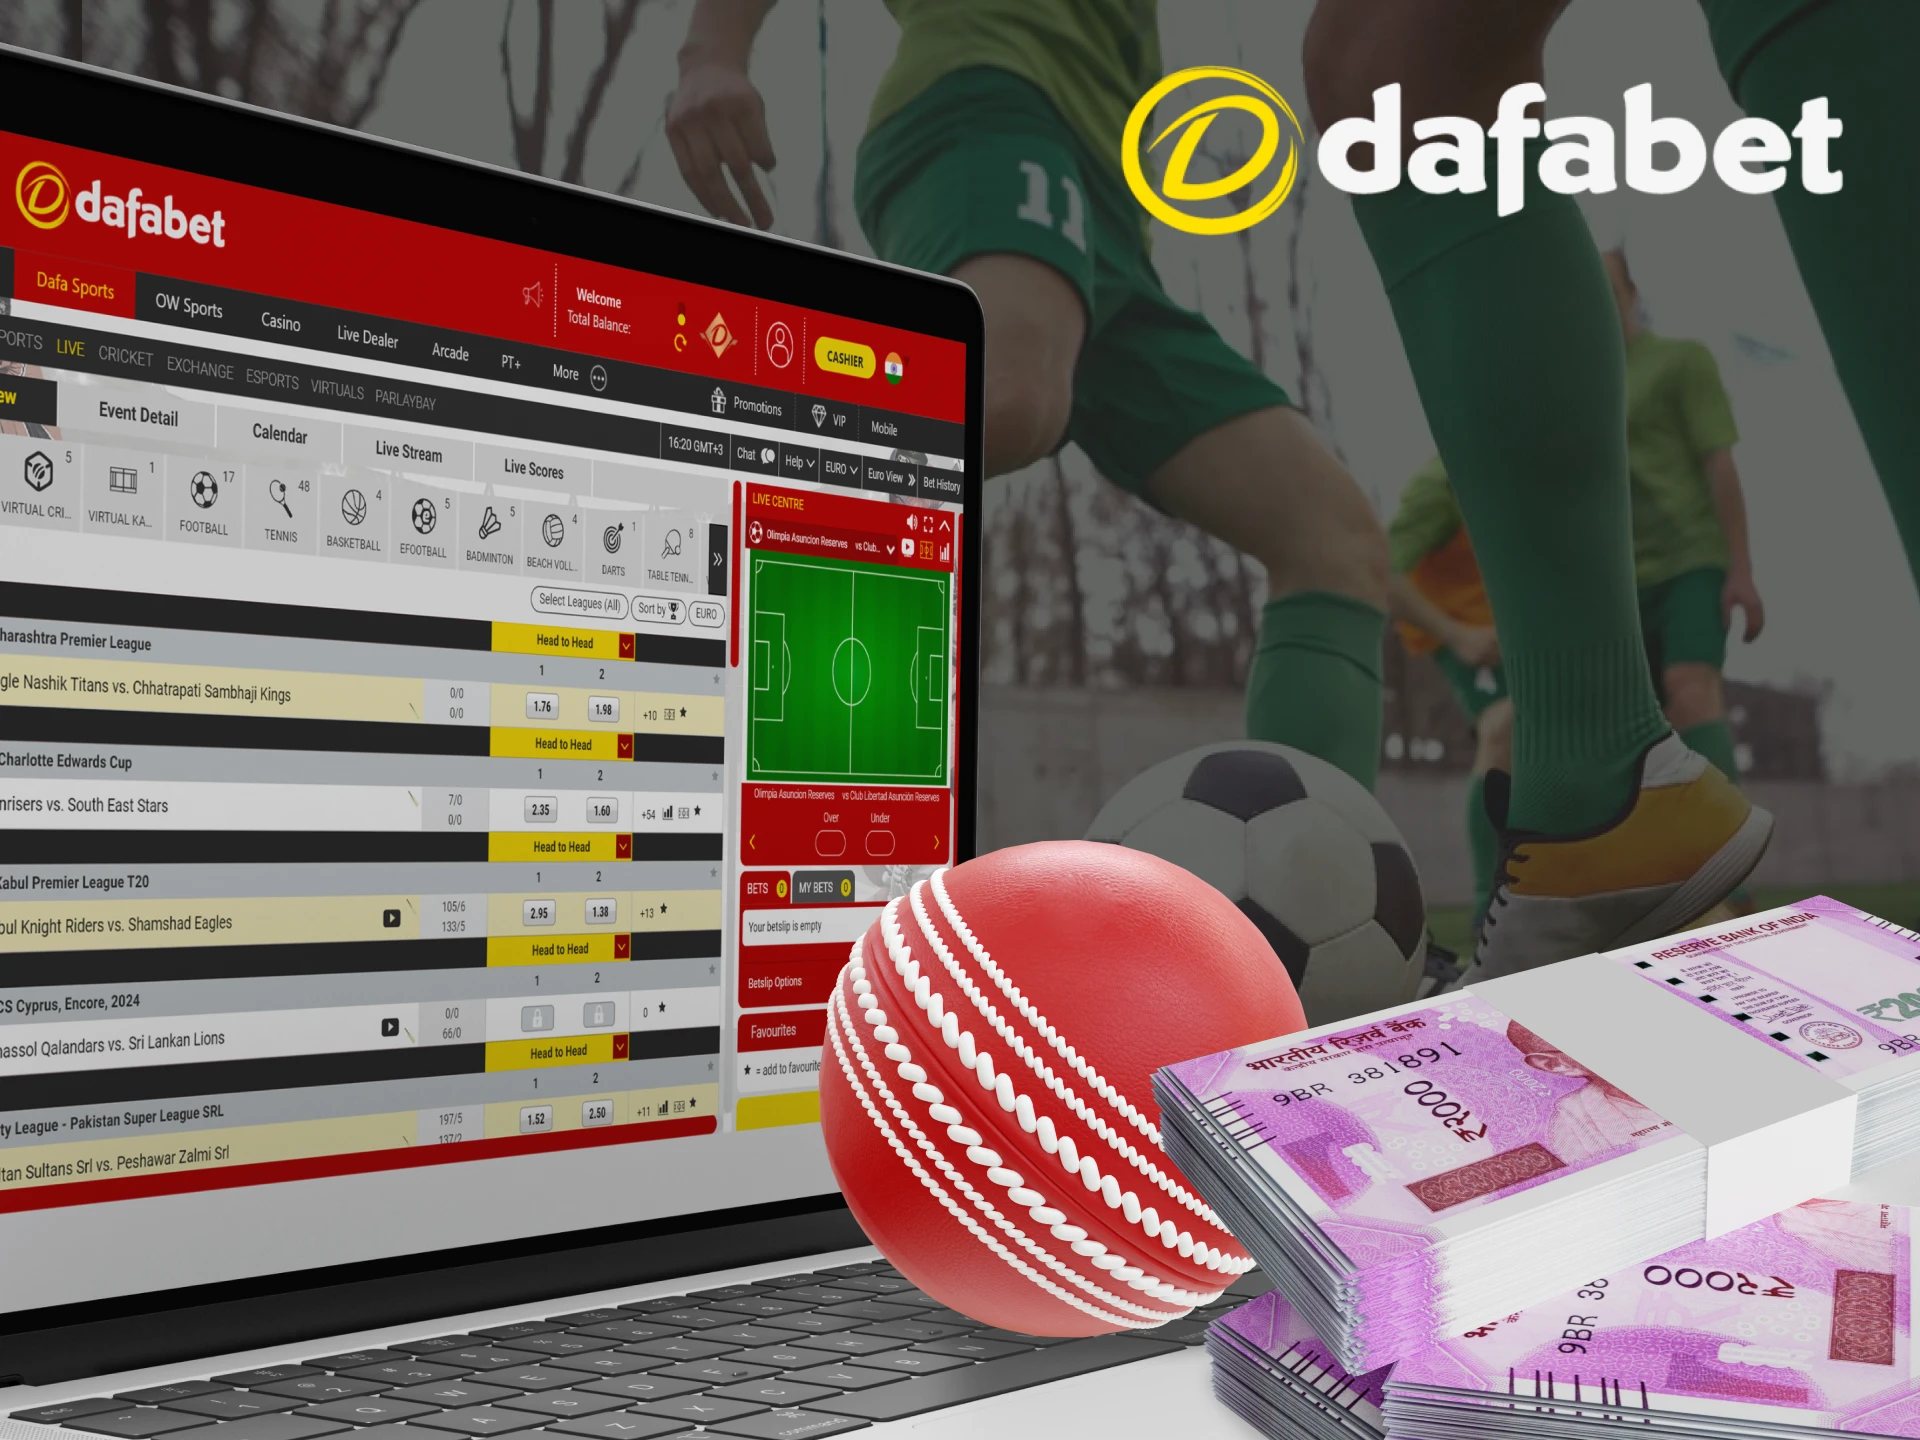 Dafabet has a large sports section, which features various sports disciplines.